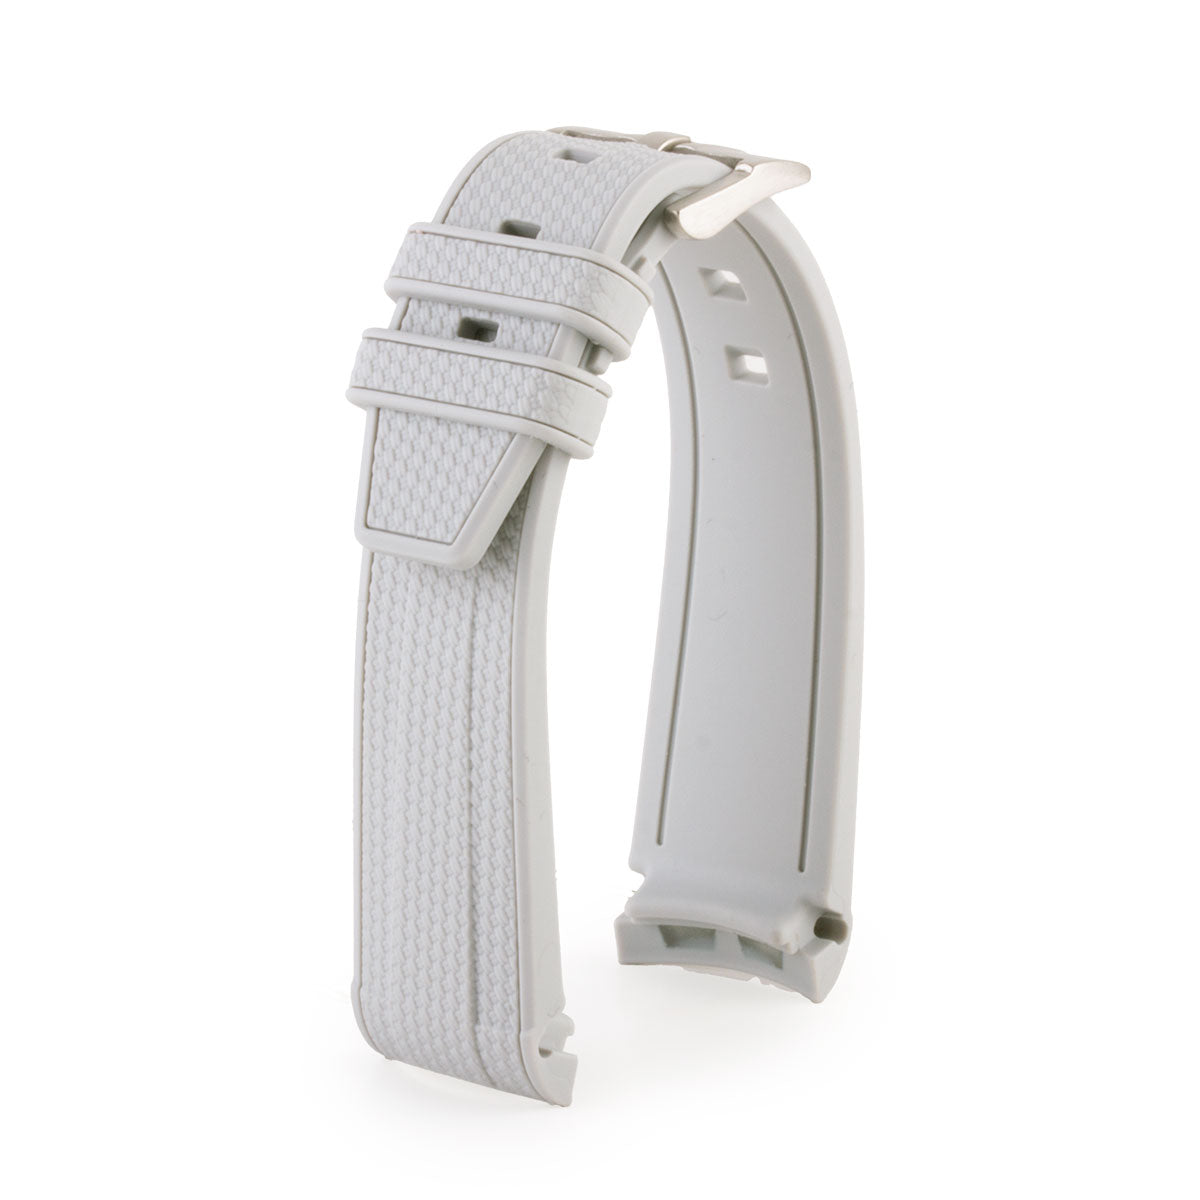 New Elastic watch strap for Omega Swatch for sale